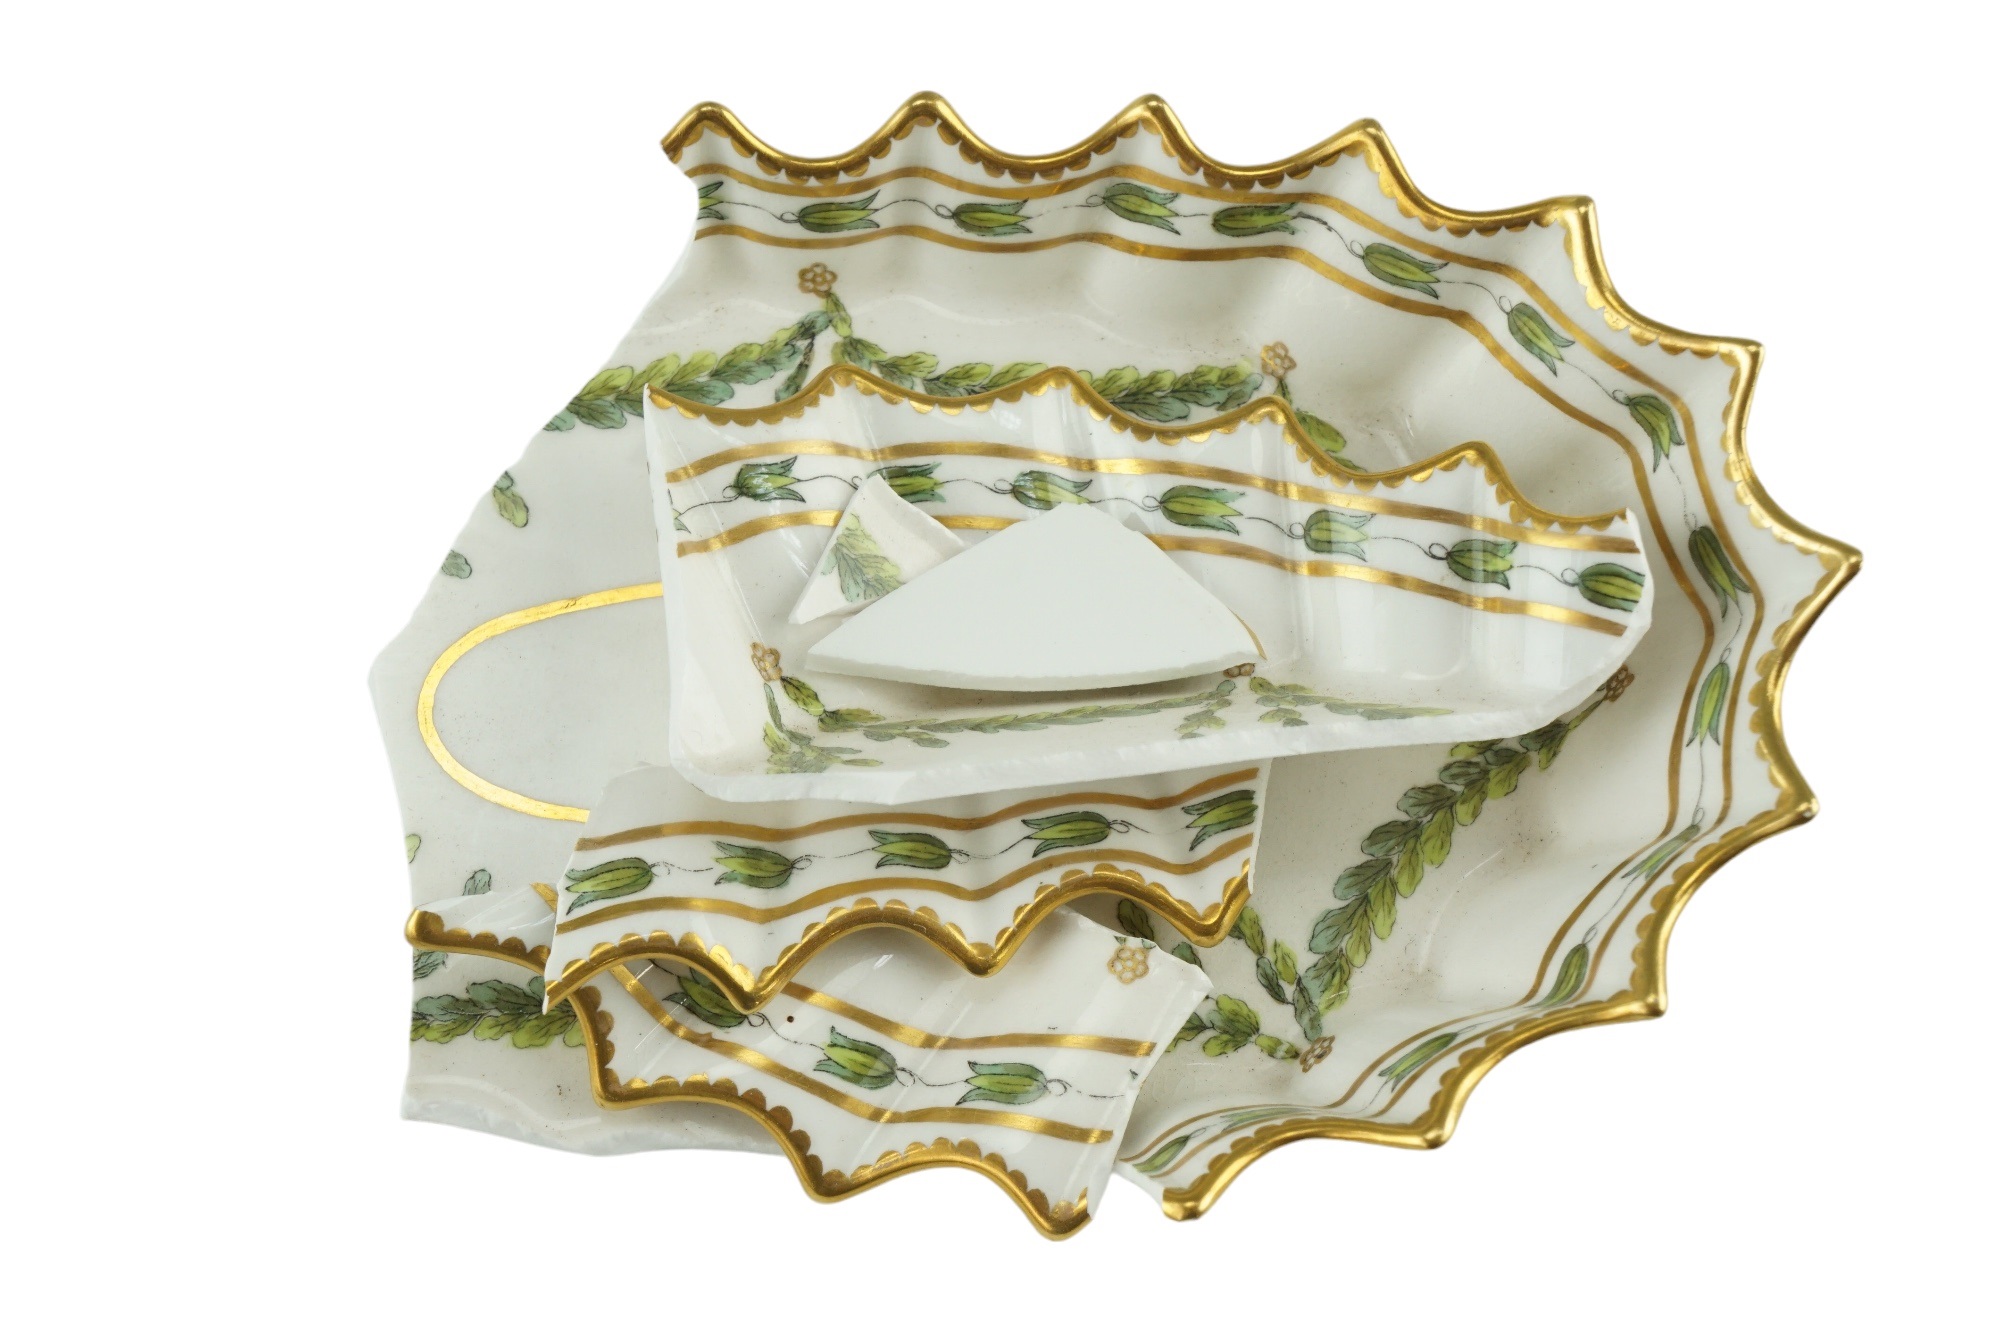 A quantity of early 20th Century Copeland hand-painted dinnerware, decorated with laurel garlands - Image 5 of 7